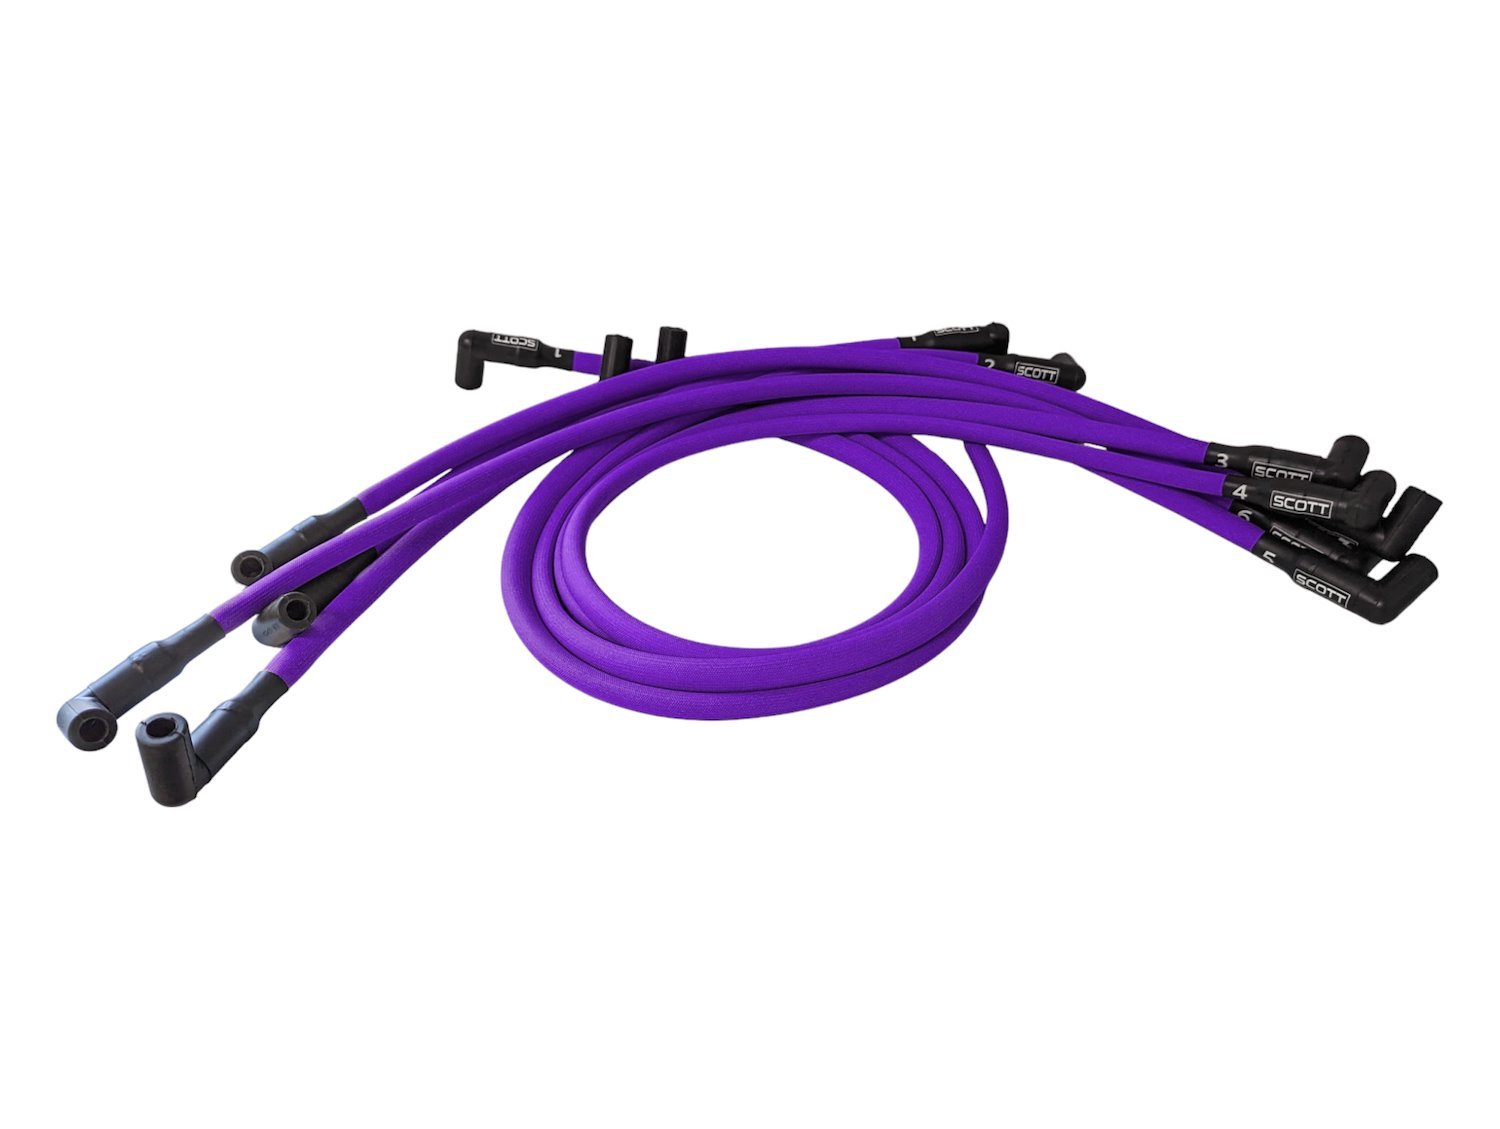 SPW-PS-604-7 High-Performance Fiberglass-Oversleeved Spark Plug Wire Set for Small Block Chevy 604 Crate, Under Header [Purple]